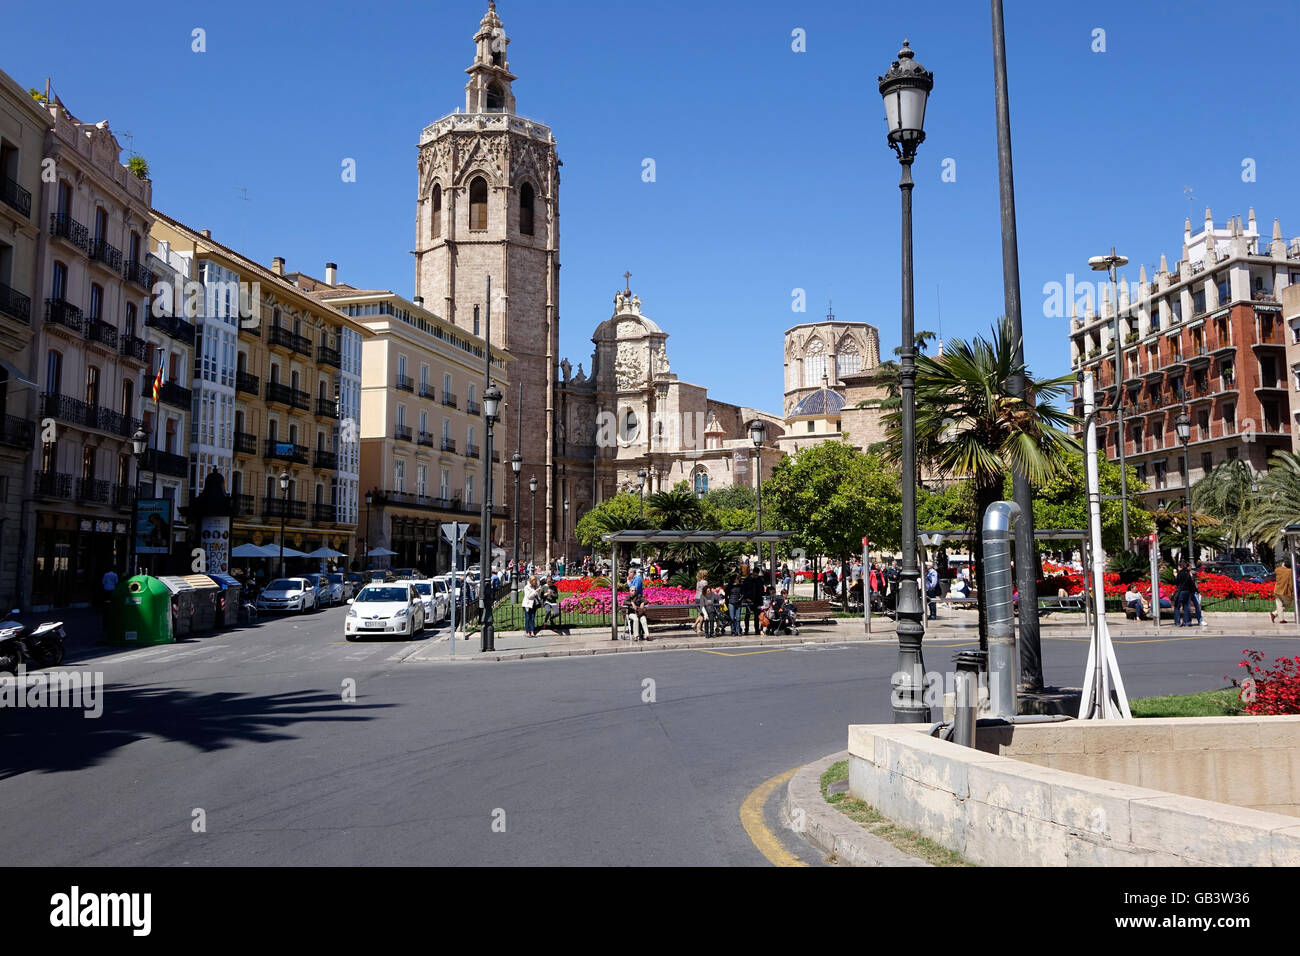 The Plaza de la Reina is located in Valencia's old town and includes the 13th century Valencia Cathedral. Stock Photo